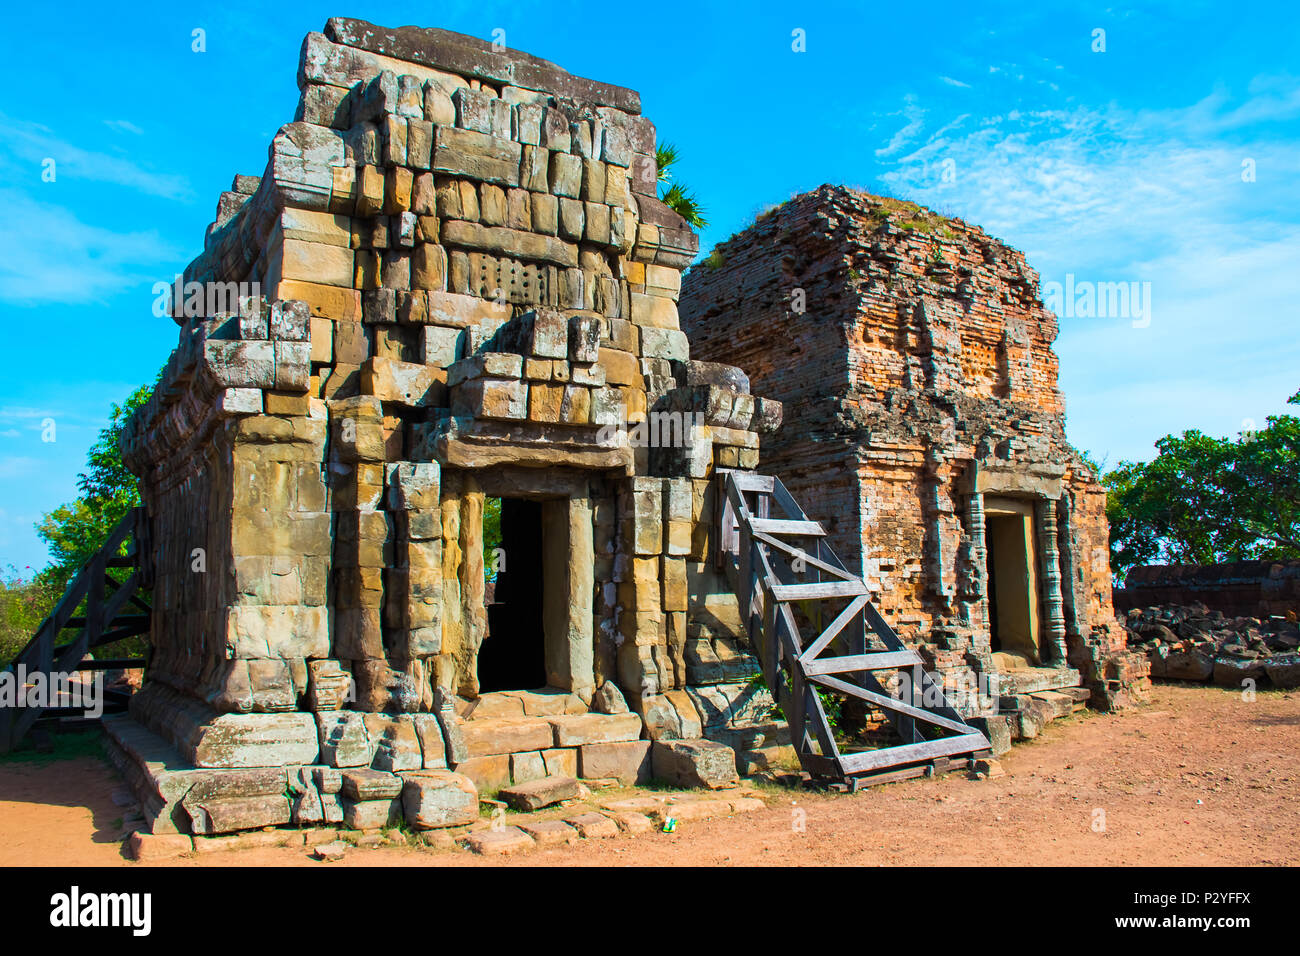 Mysterious old ancient Phnom Krom temple on the hill near Siem Reap, Cambodia Stock Photo